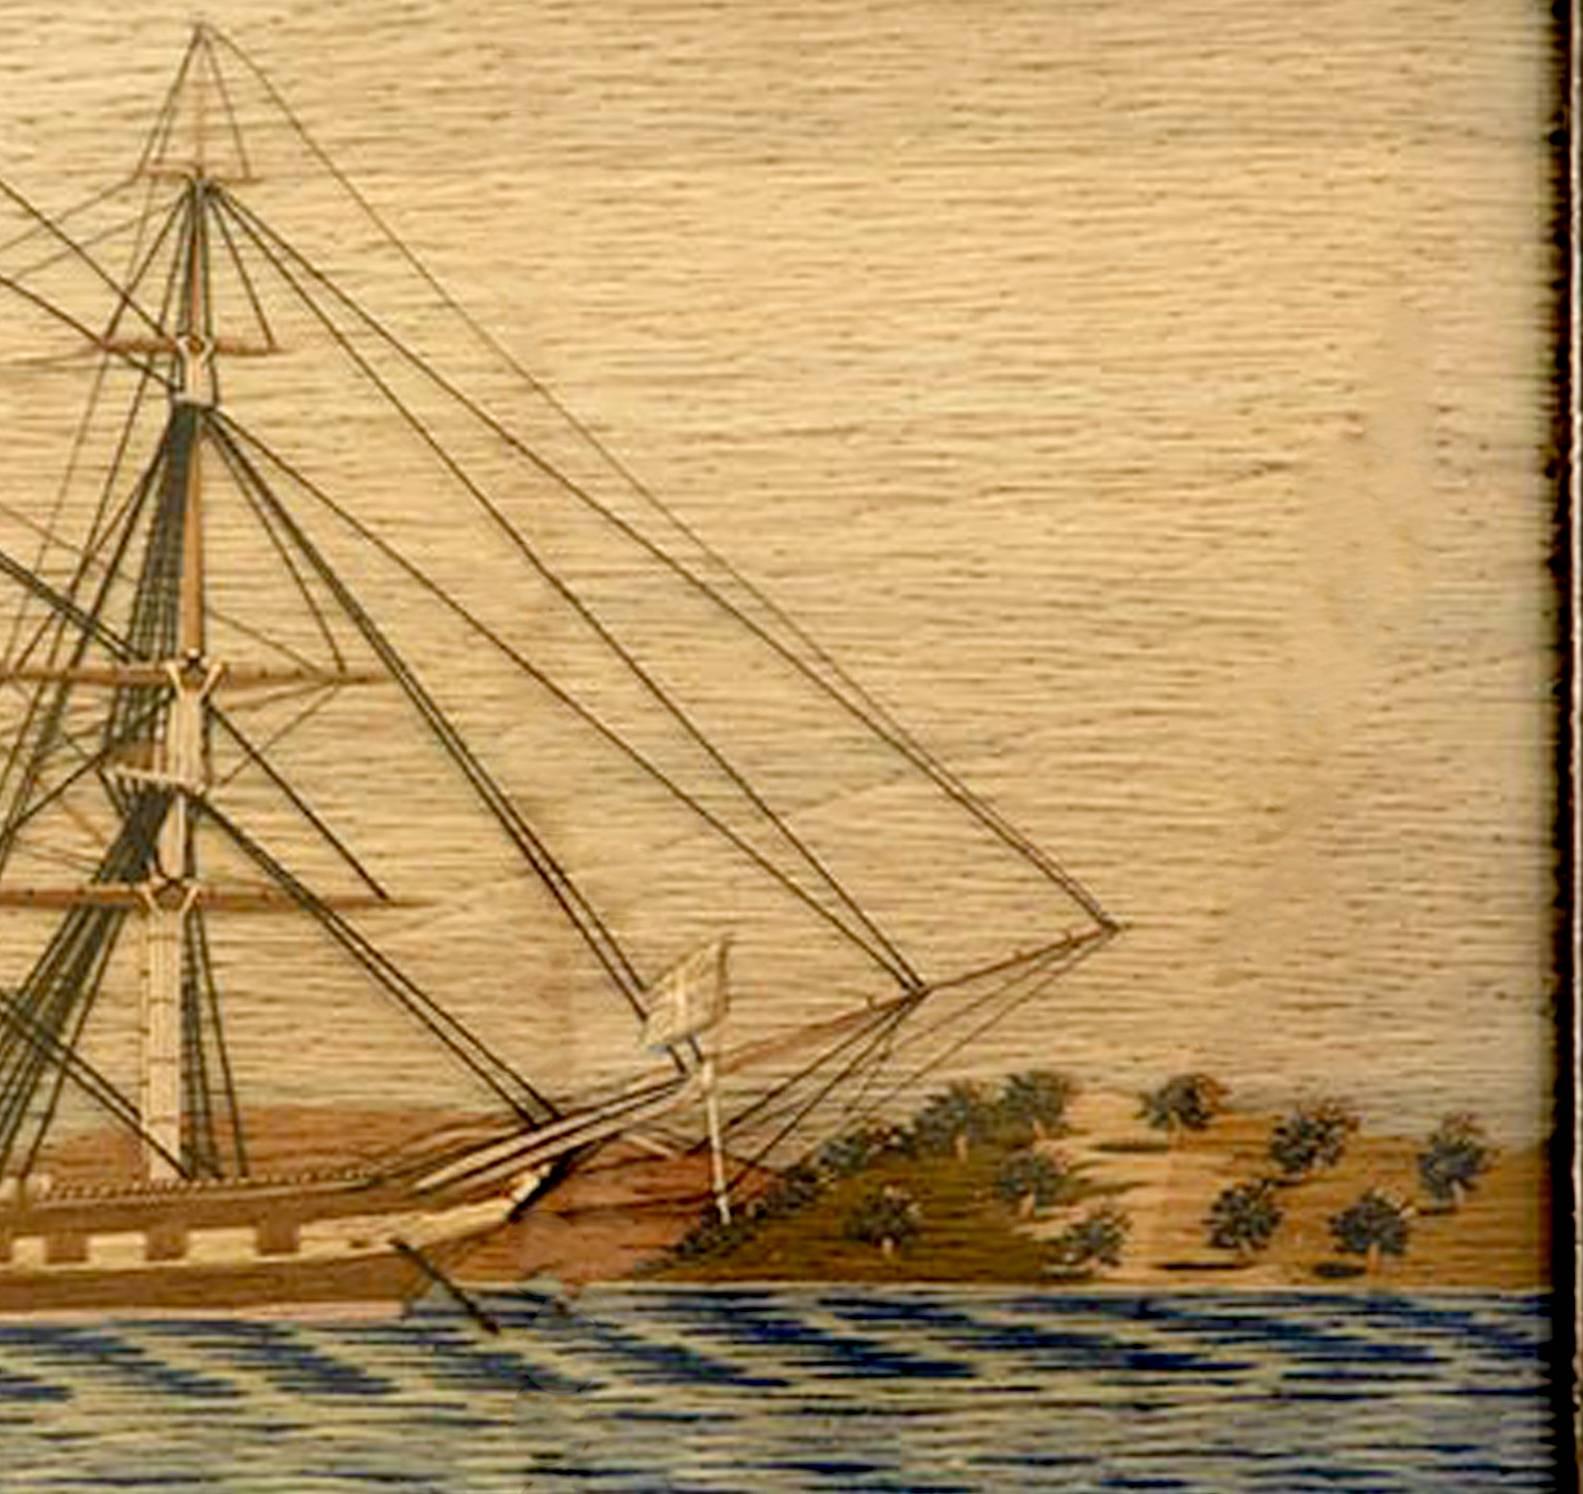 Sailor's Woolwork Picture, circa 1865.

The very well designed sailor's woolwork depicts an anchored Royal Navy frigate with land behind on a striated blue sea. The land consist of rolling hill of parkland with scattered trees, the trees with